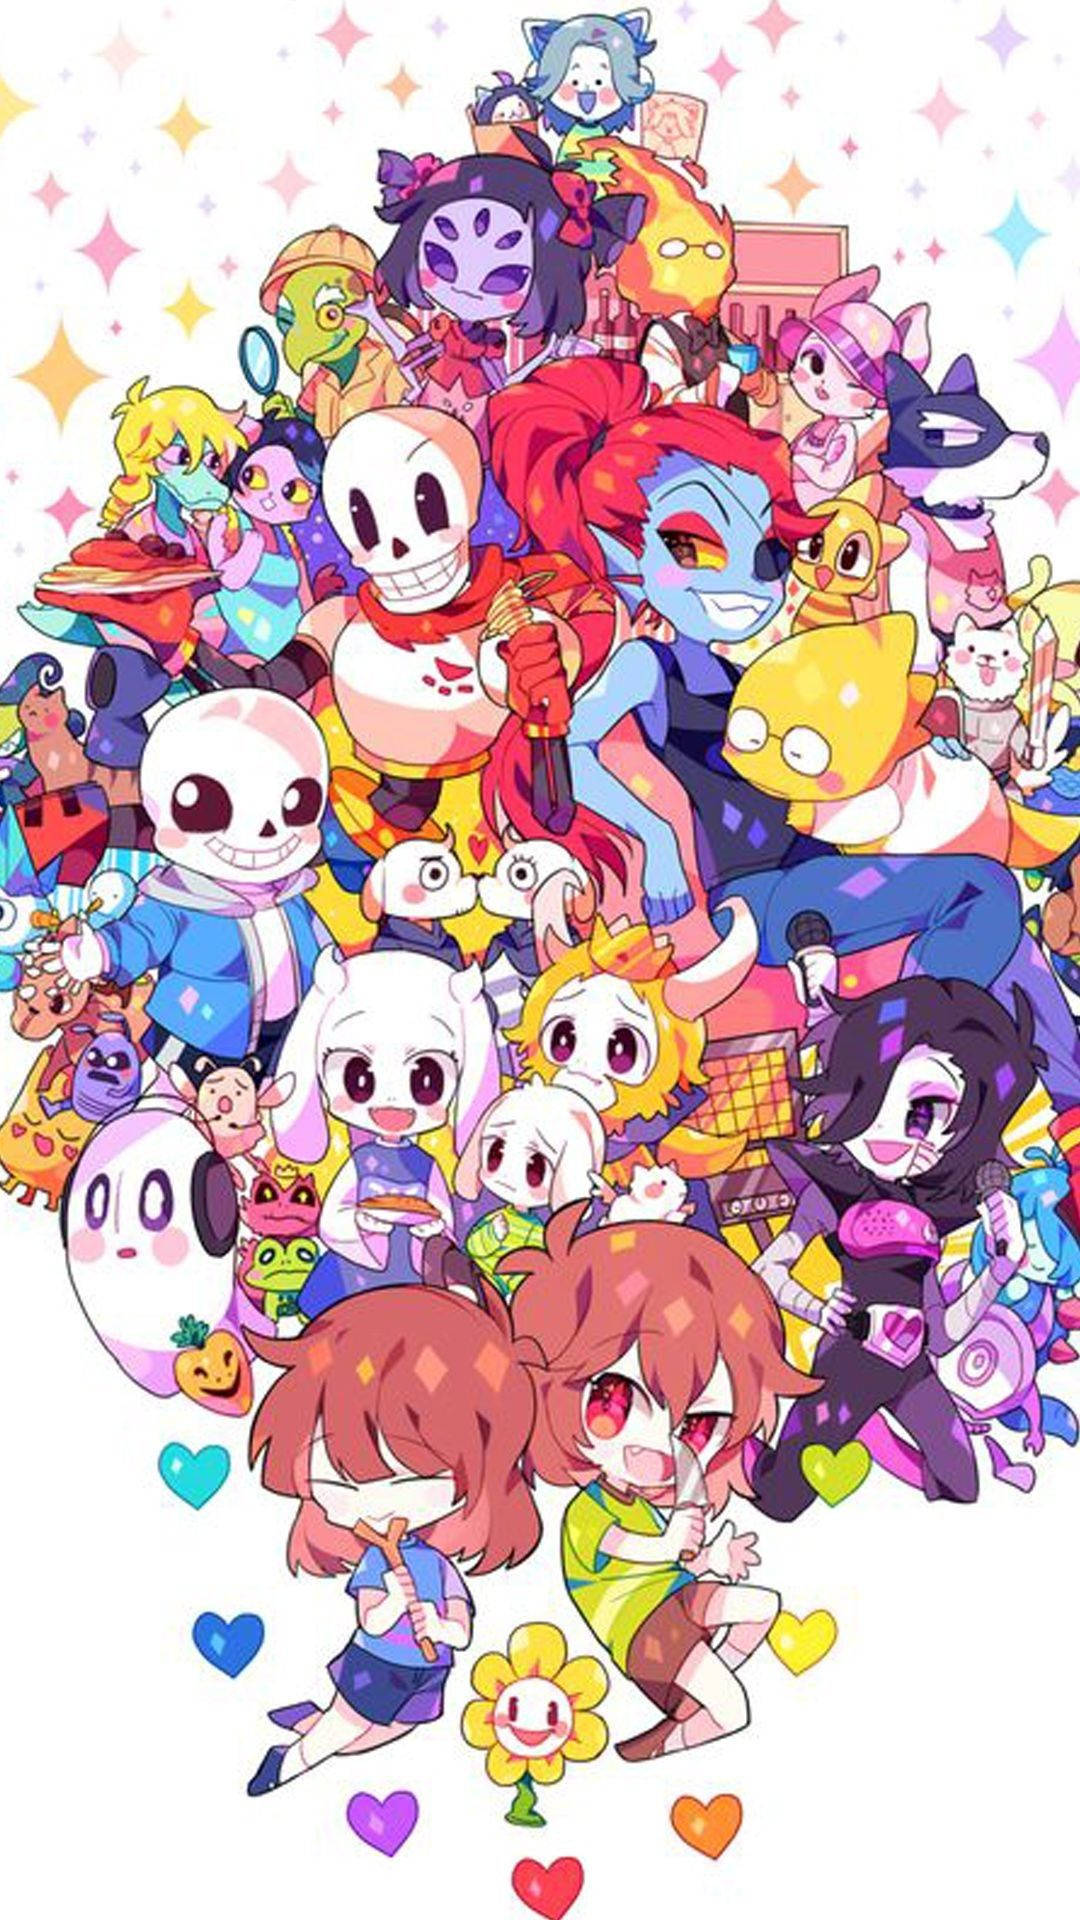 Undertale bright and cute characters wallpaper.